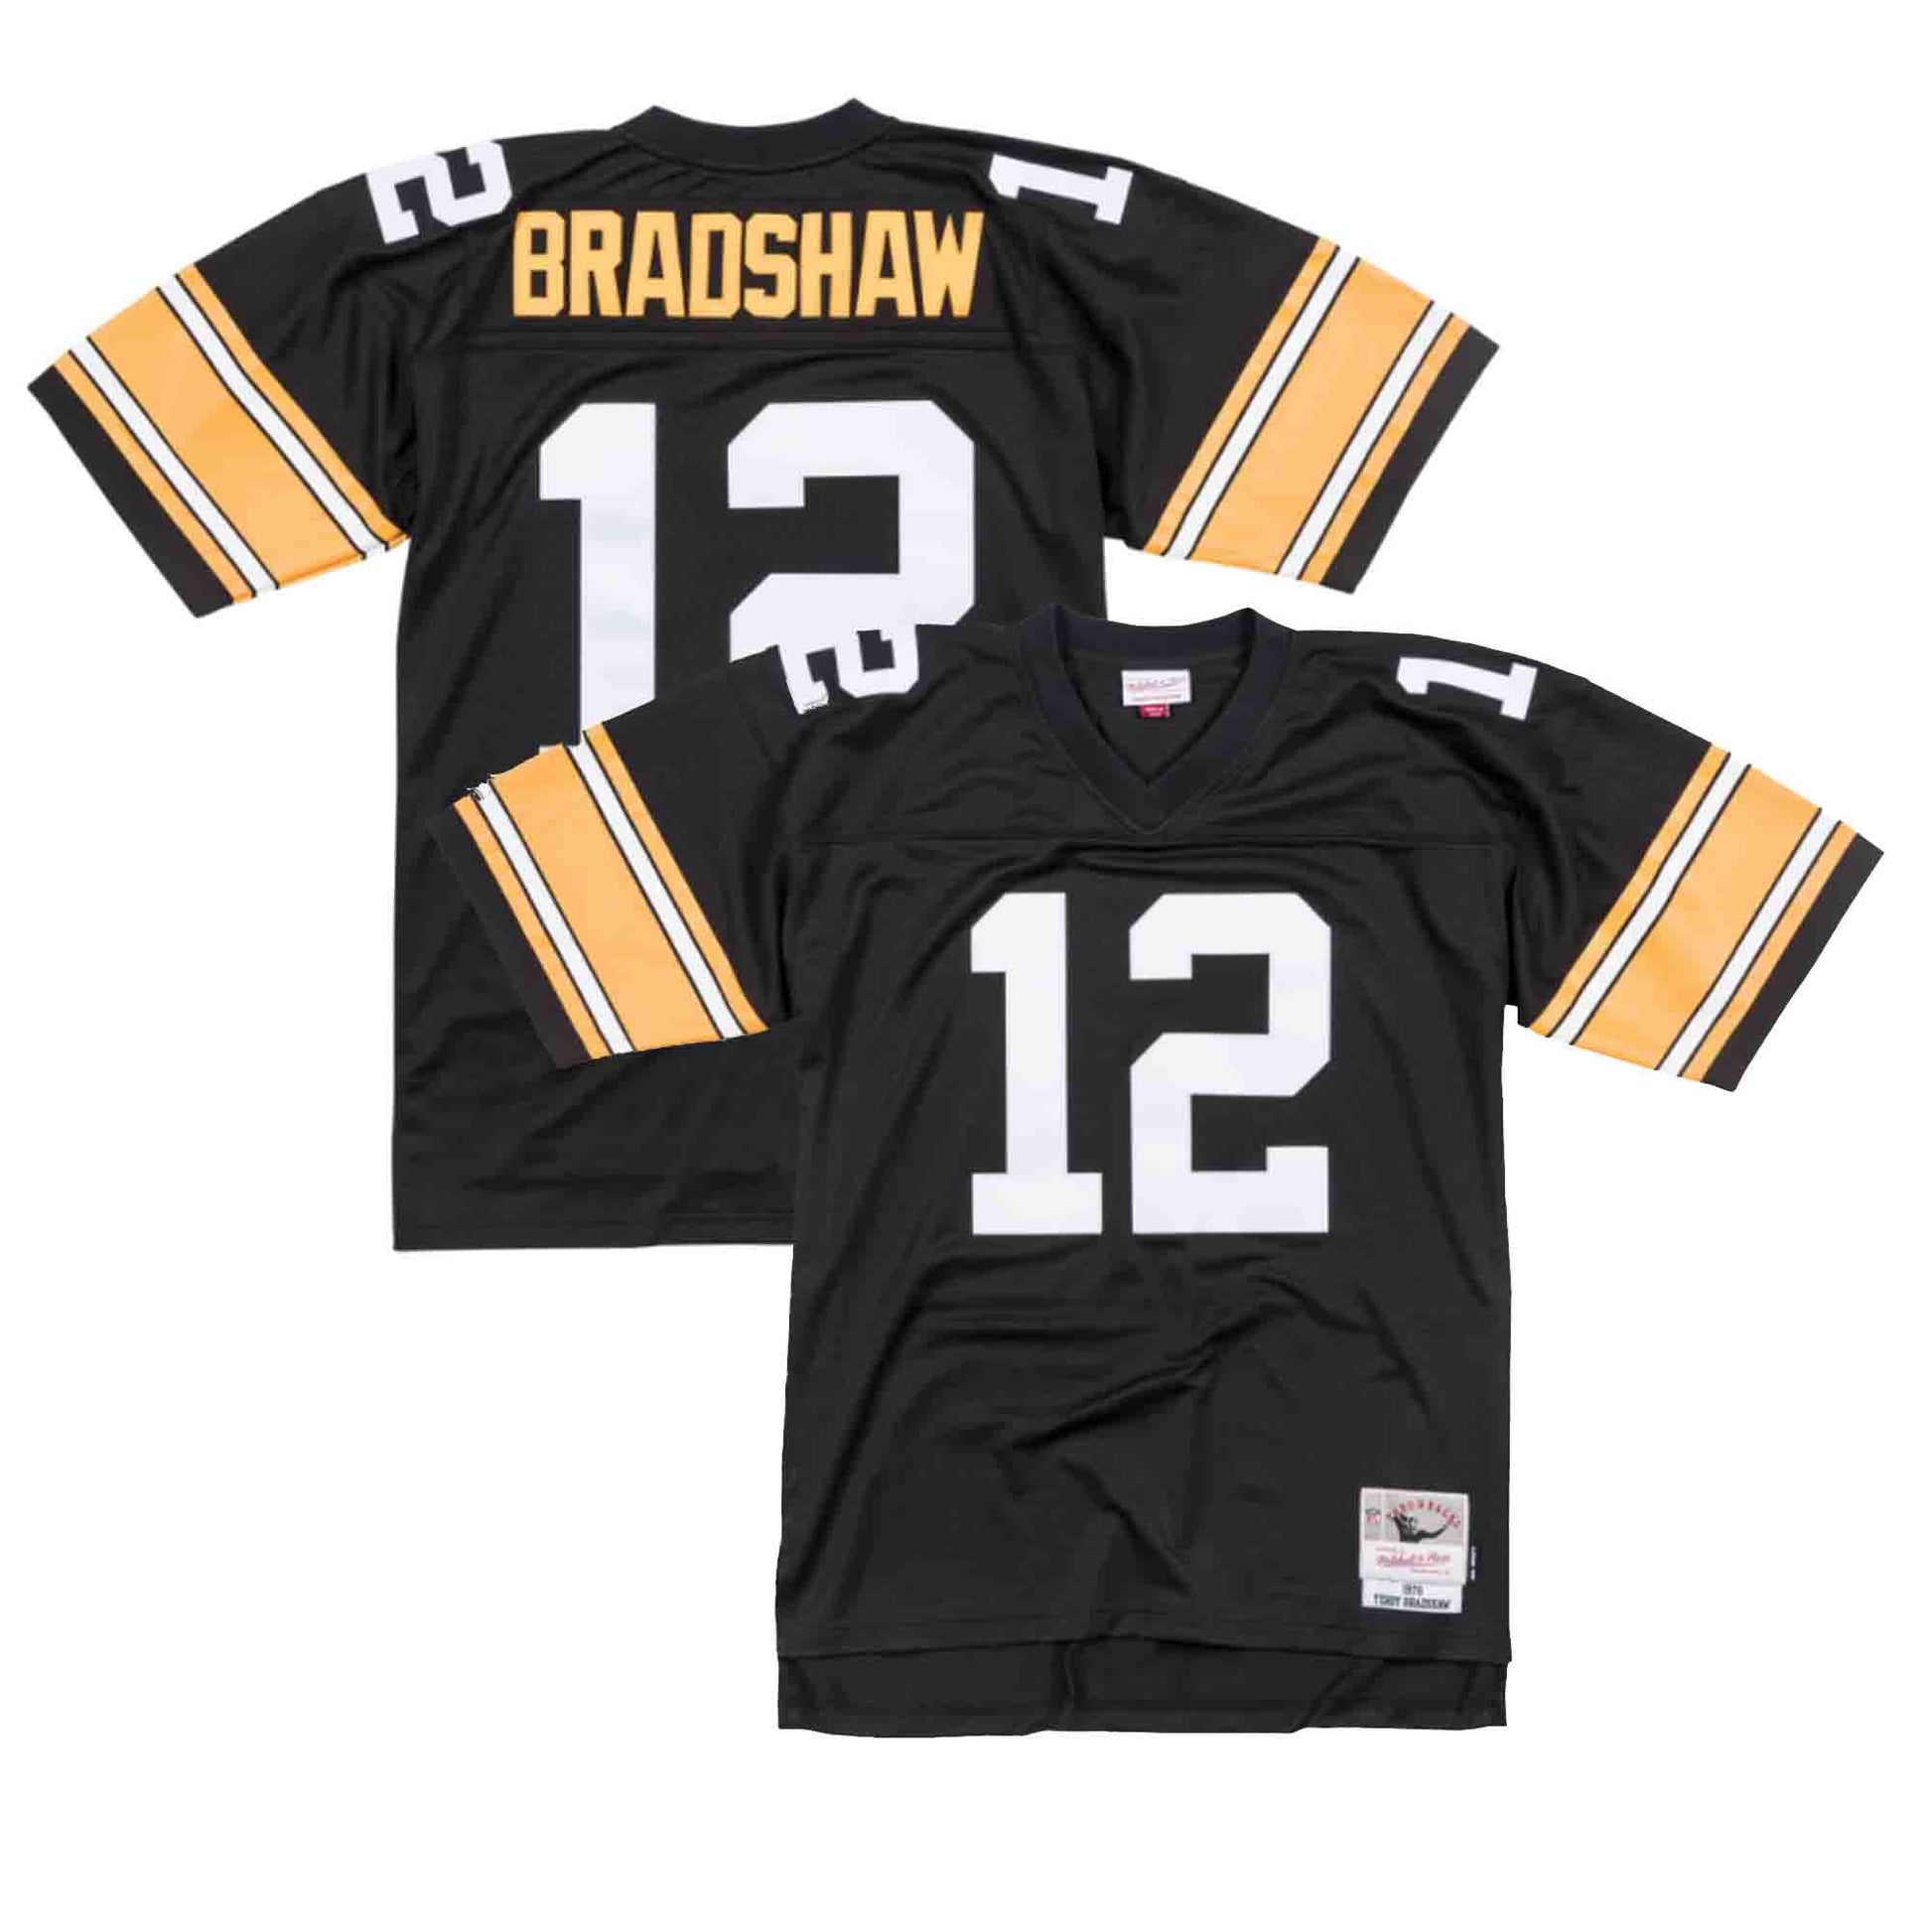 Pittsburgh Steelers Jersey, worn by Terry Bradshaw